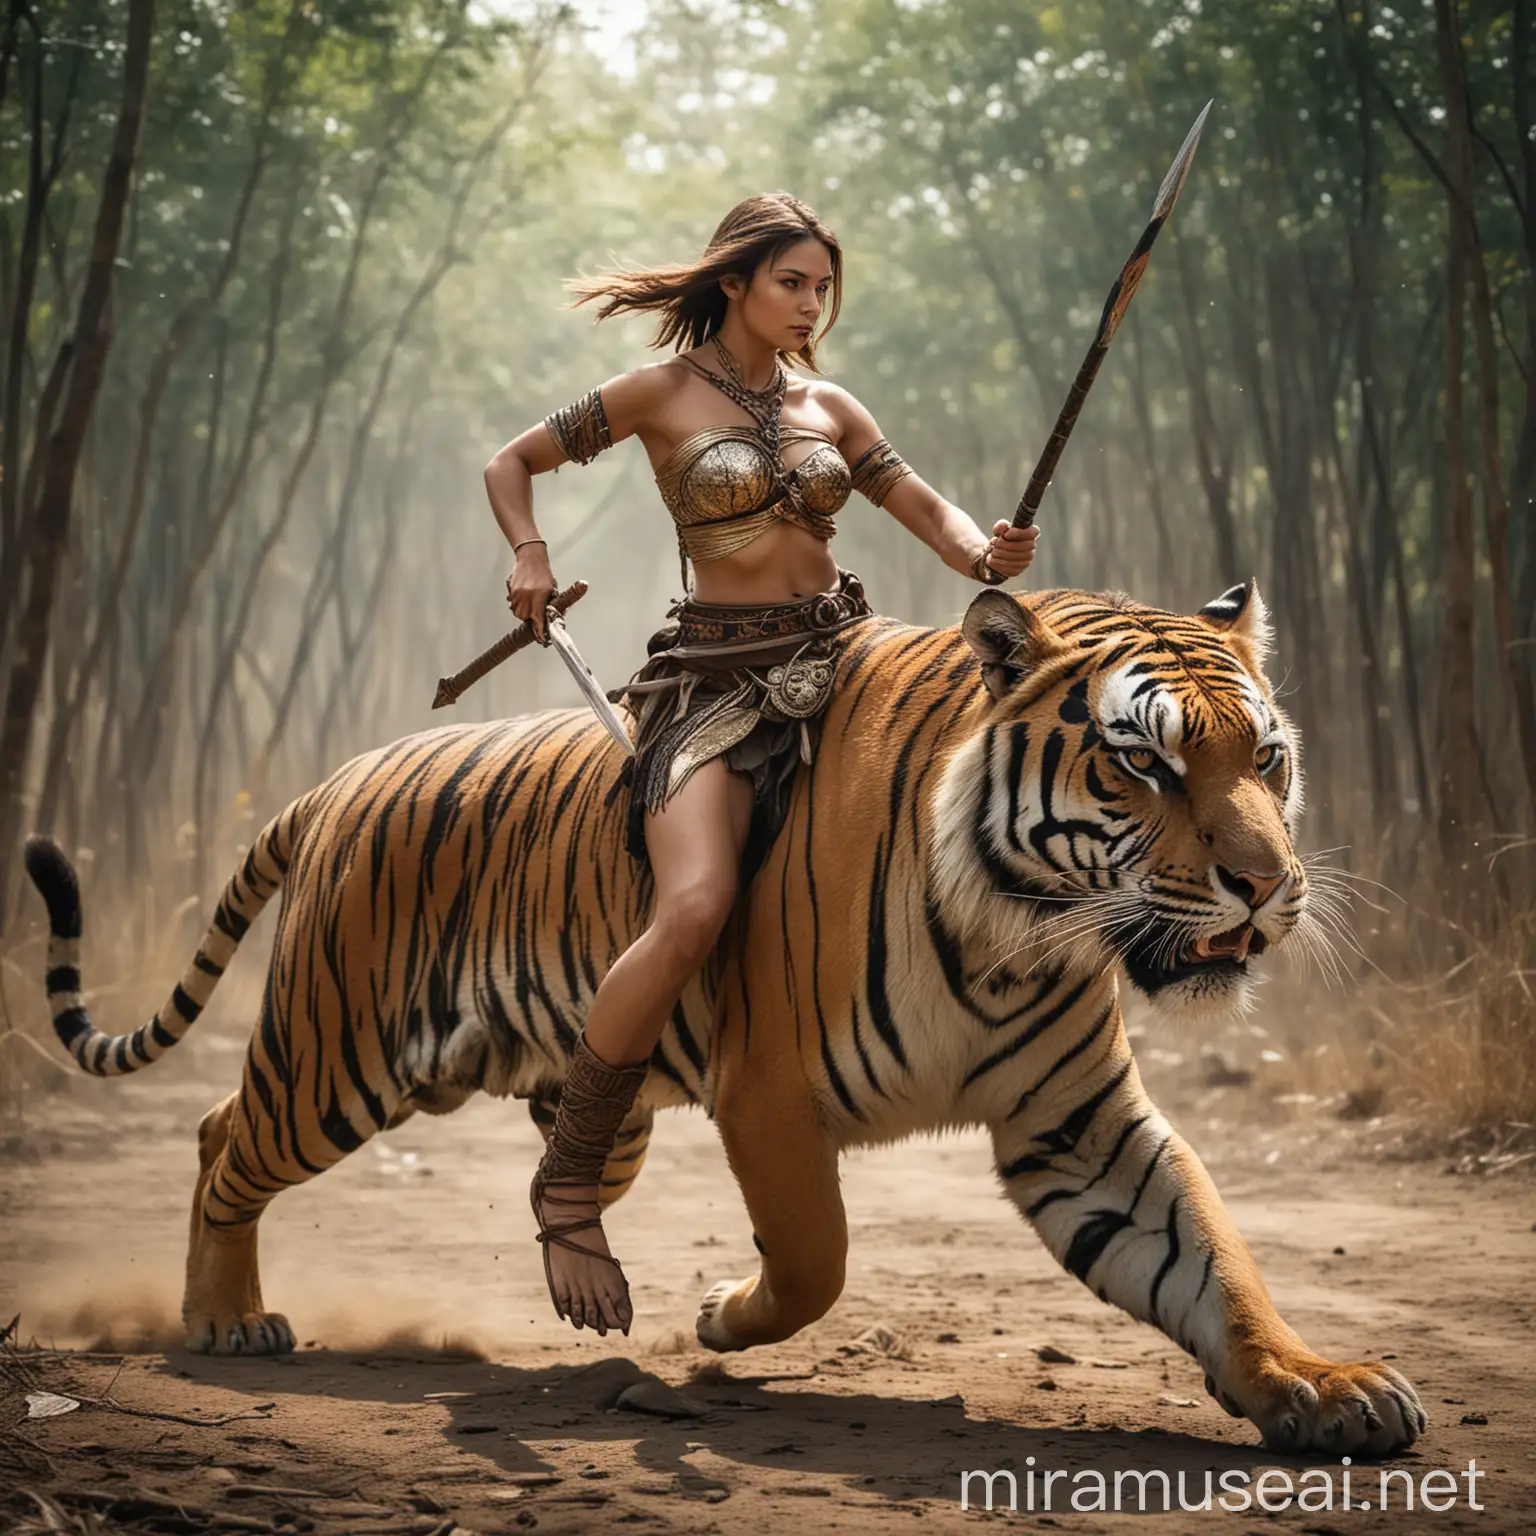 Elegant Women Riding Tiger with Spear Bold and Adventurous Women in Action